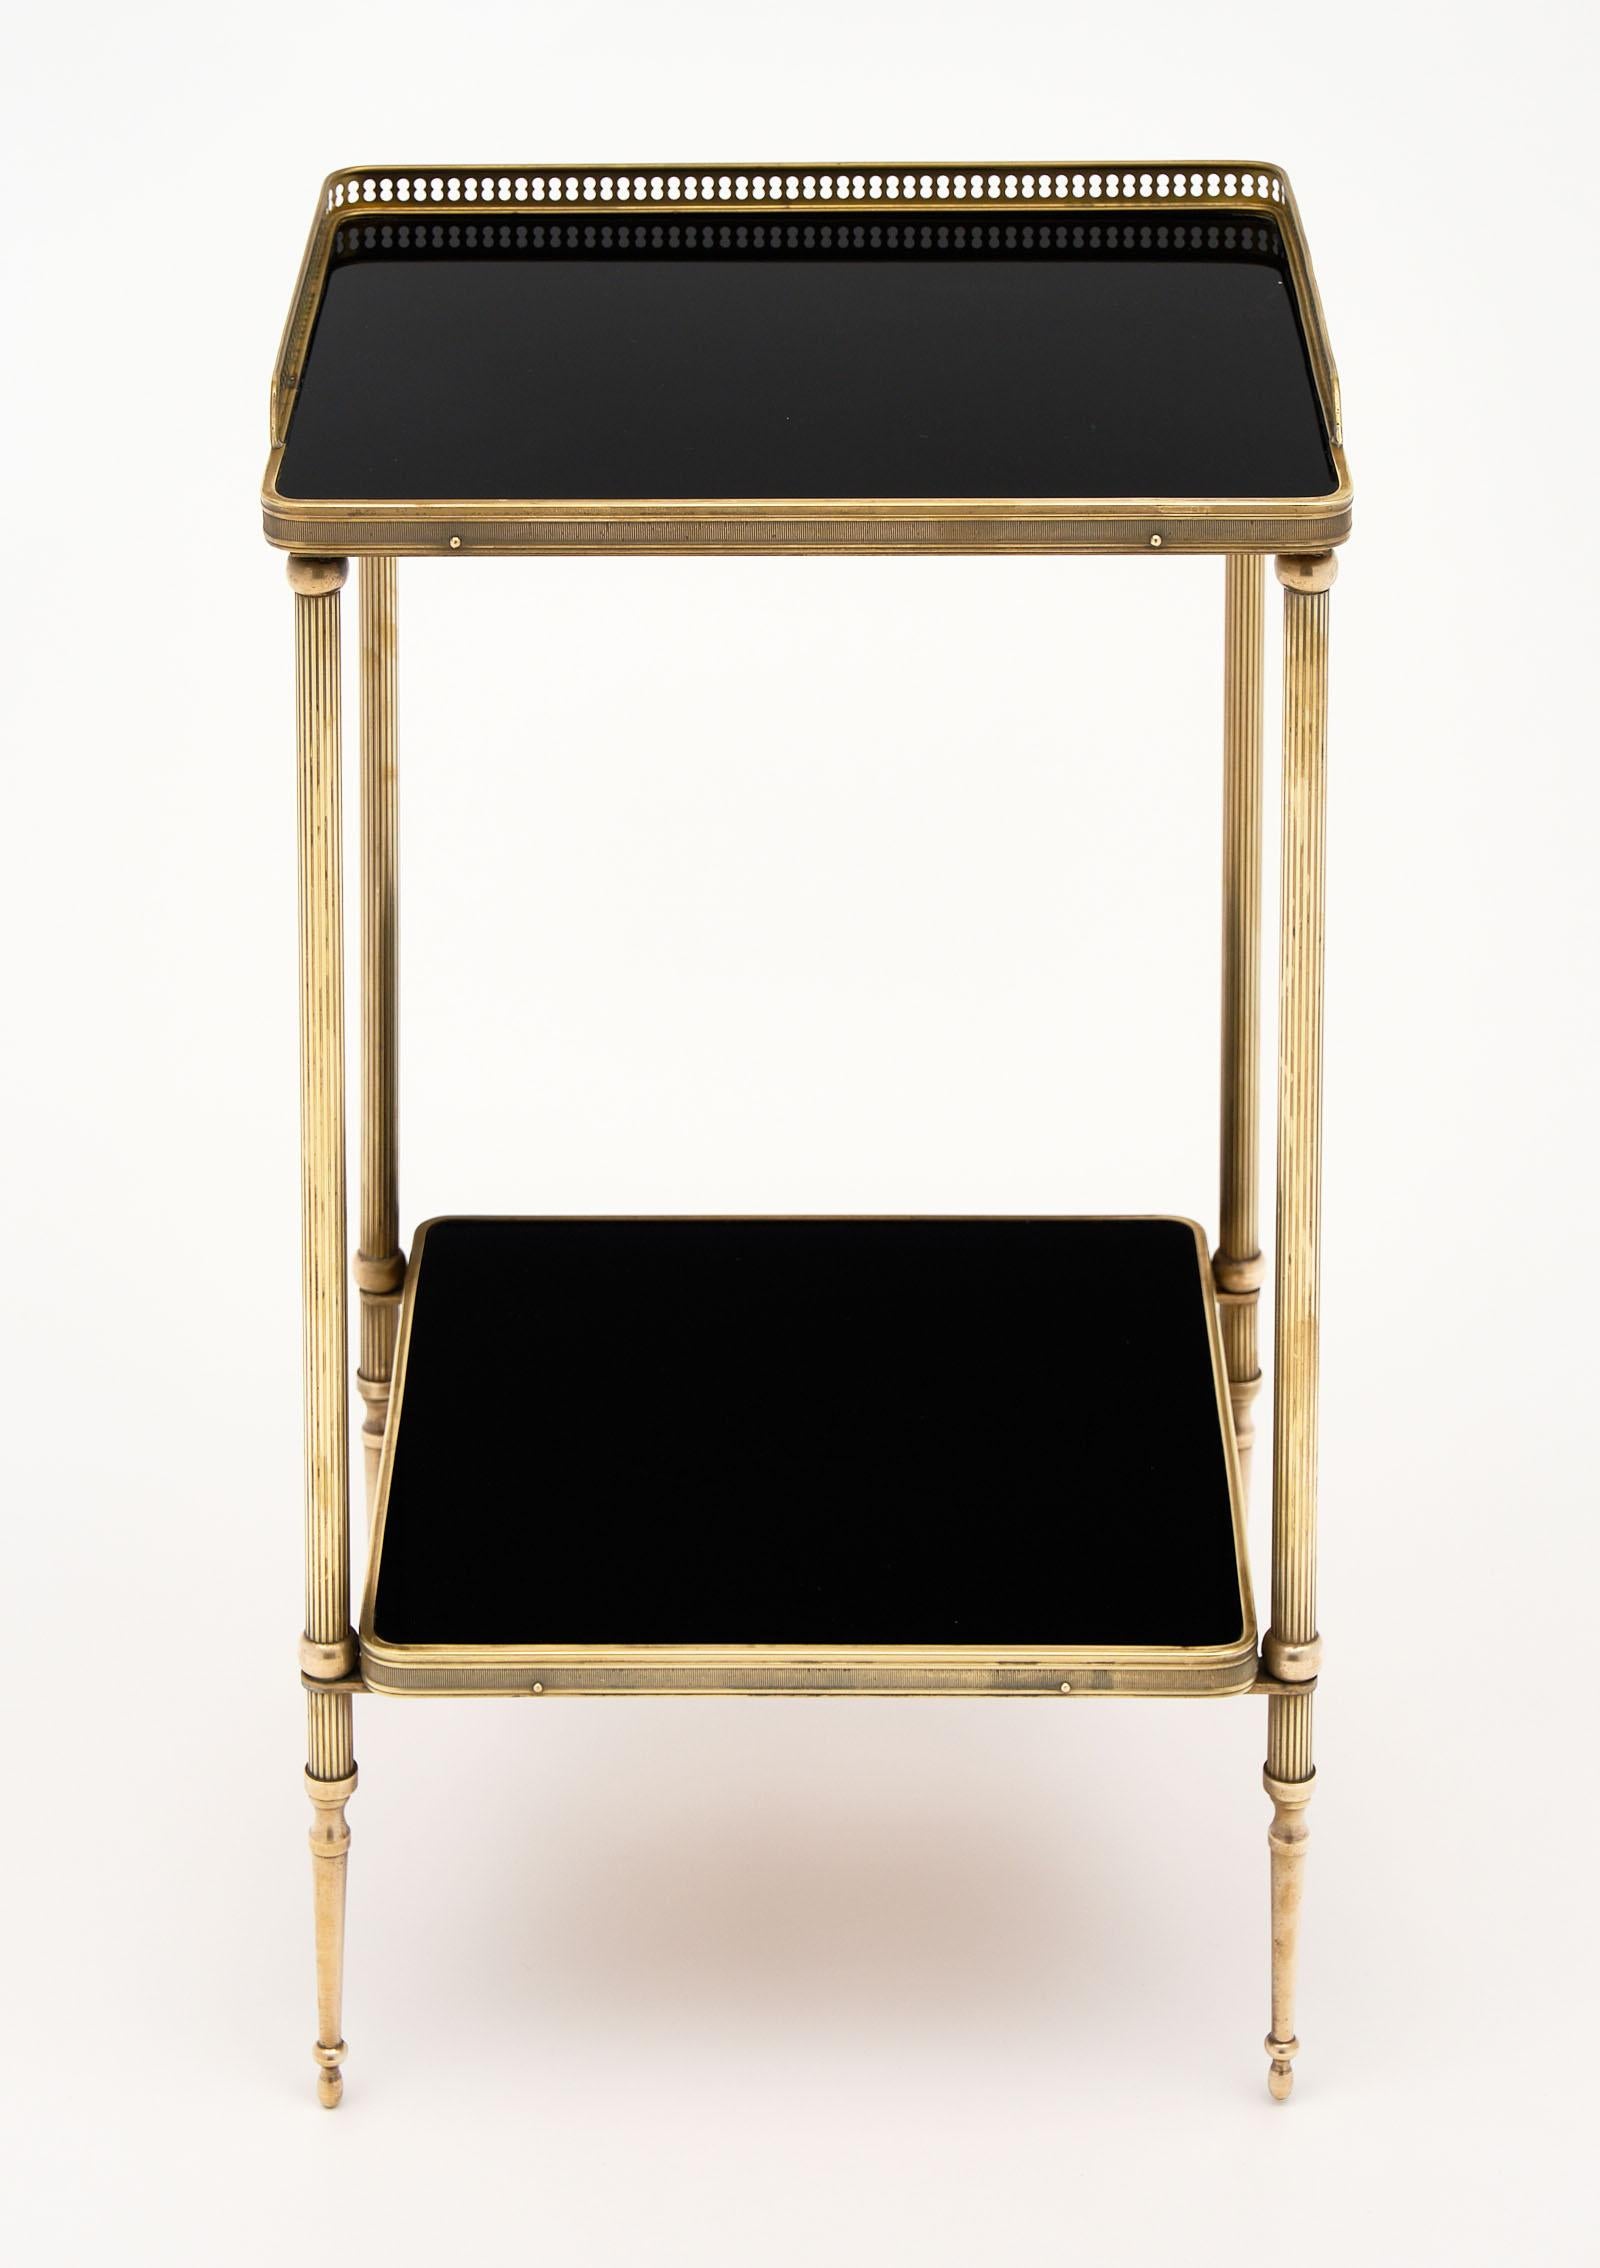 French Maison Baguès side table made with a polished brass structure and black glass top and shelf.